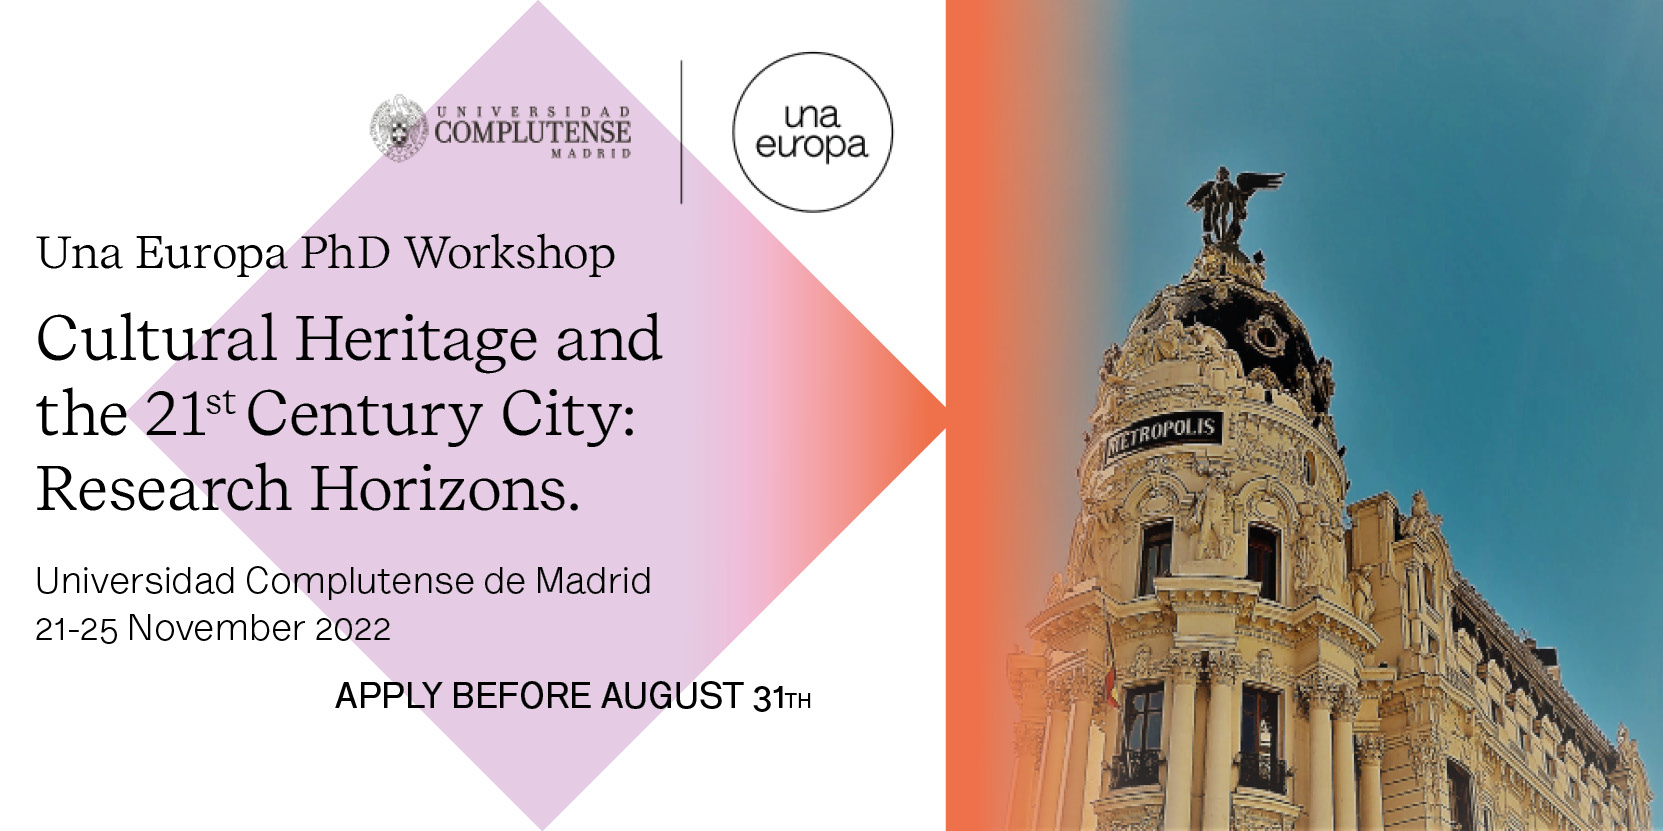 UNA Europa PhD workshop 'Cultural Heritage and the 21st century city: Research Horizons'